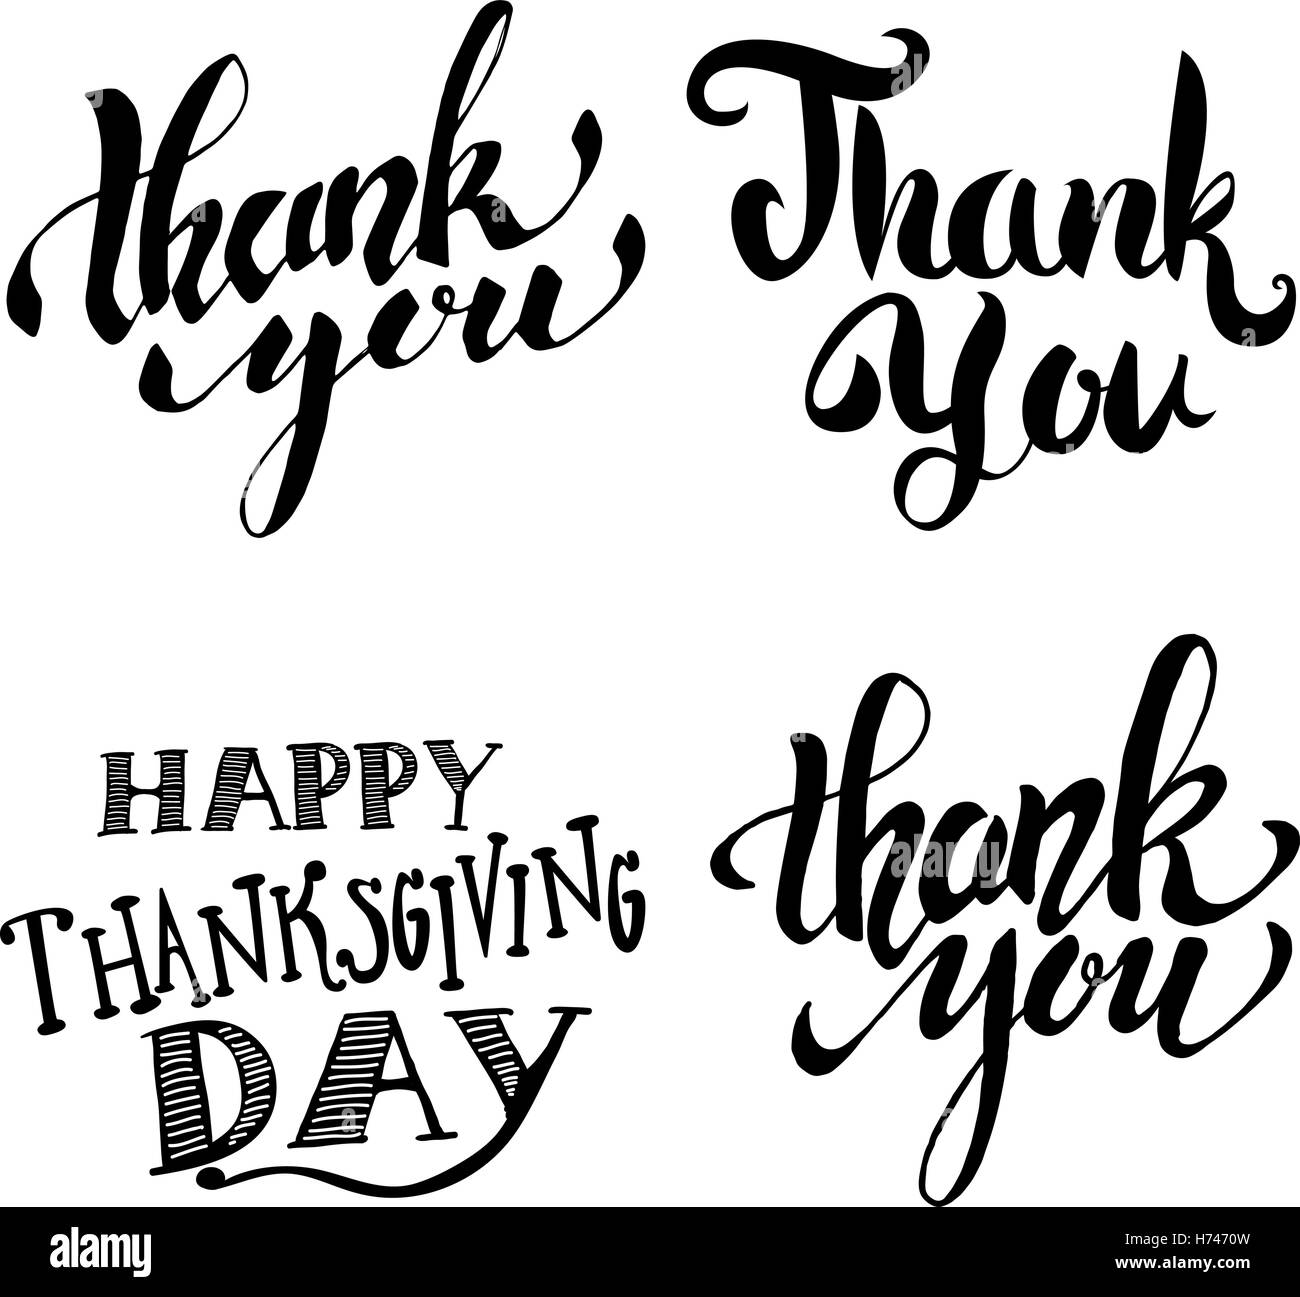 Thank you. Happy Thanksgiving Day. Hand drawn lettering isolated on white background. Design element for poster, greeting card,  Stock Vector